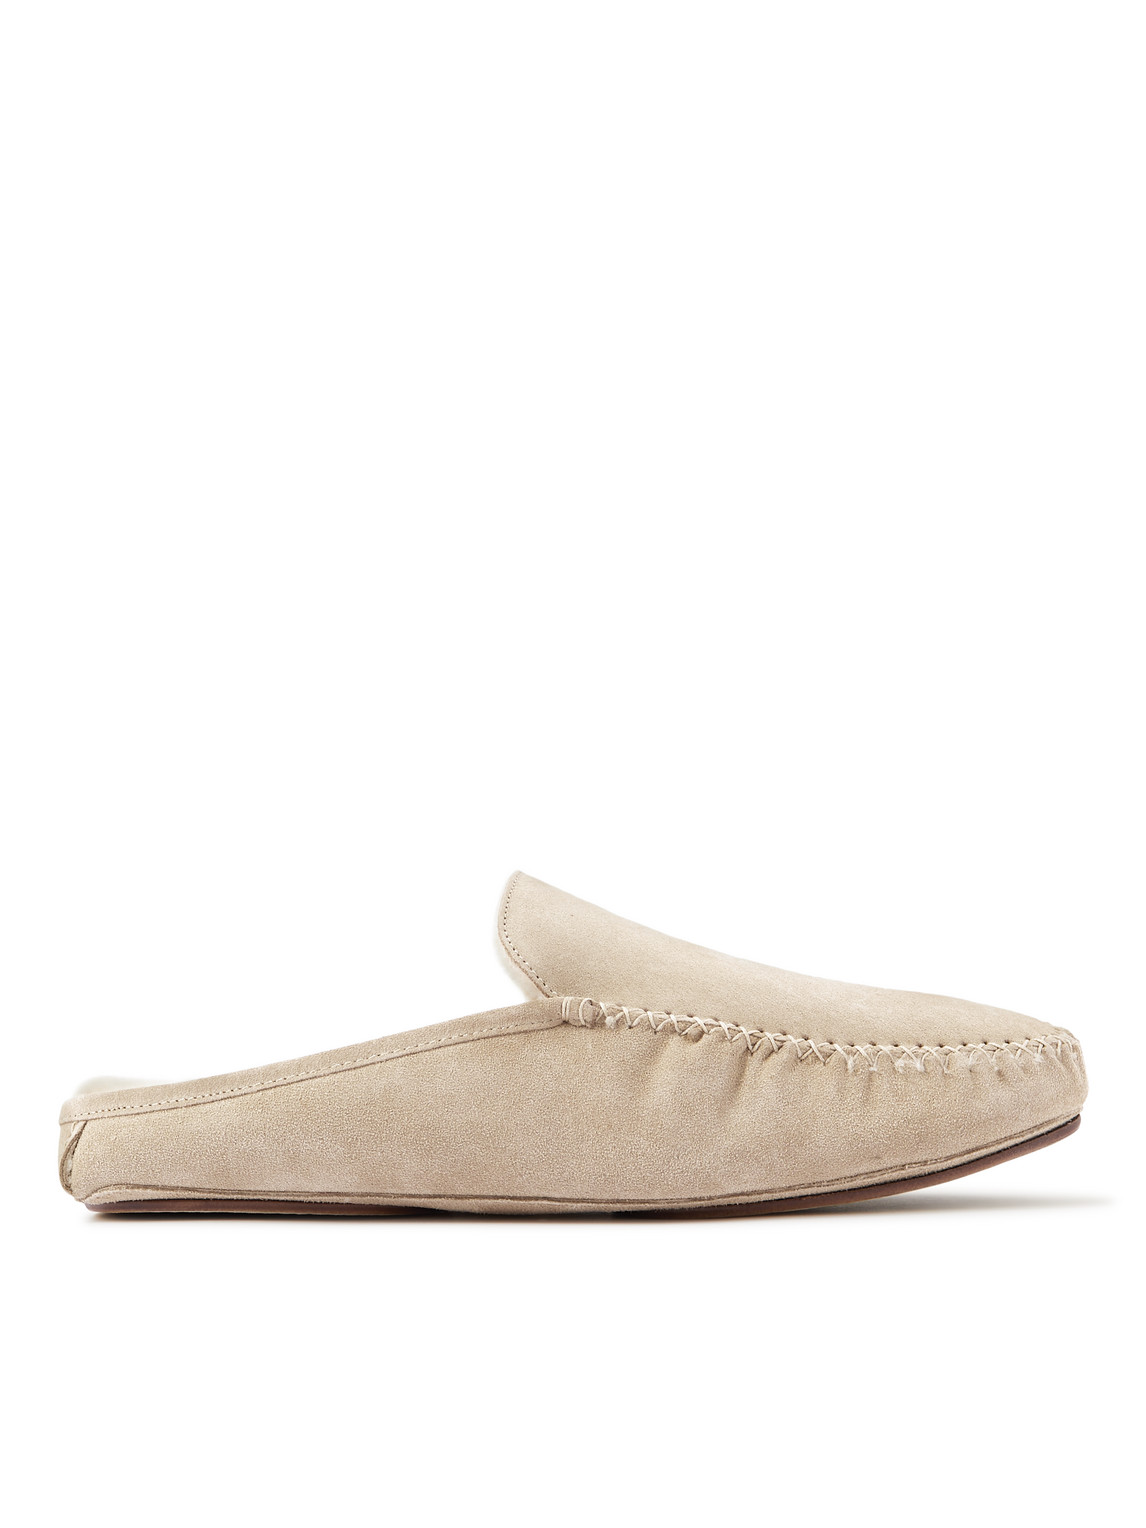 Manolo Blahnik Crawford Shearling-lined Suede Slippers In Neutrals